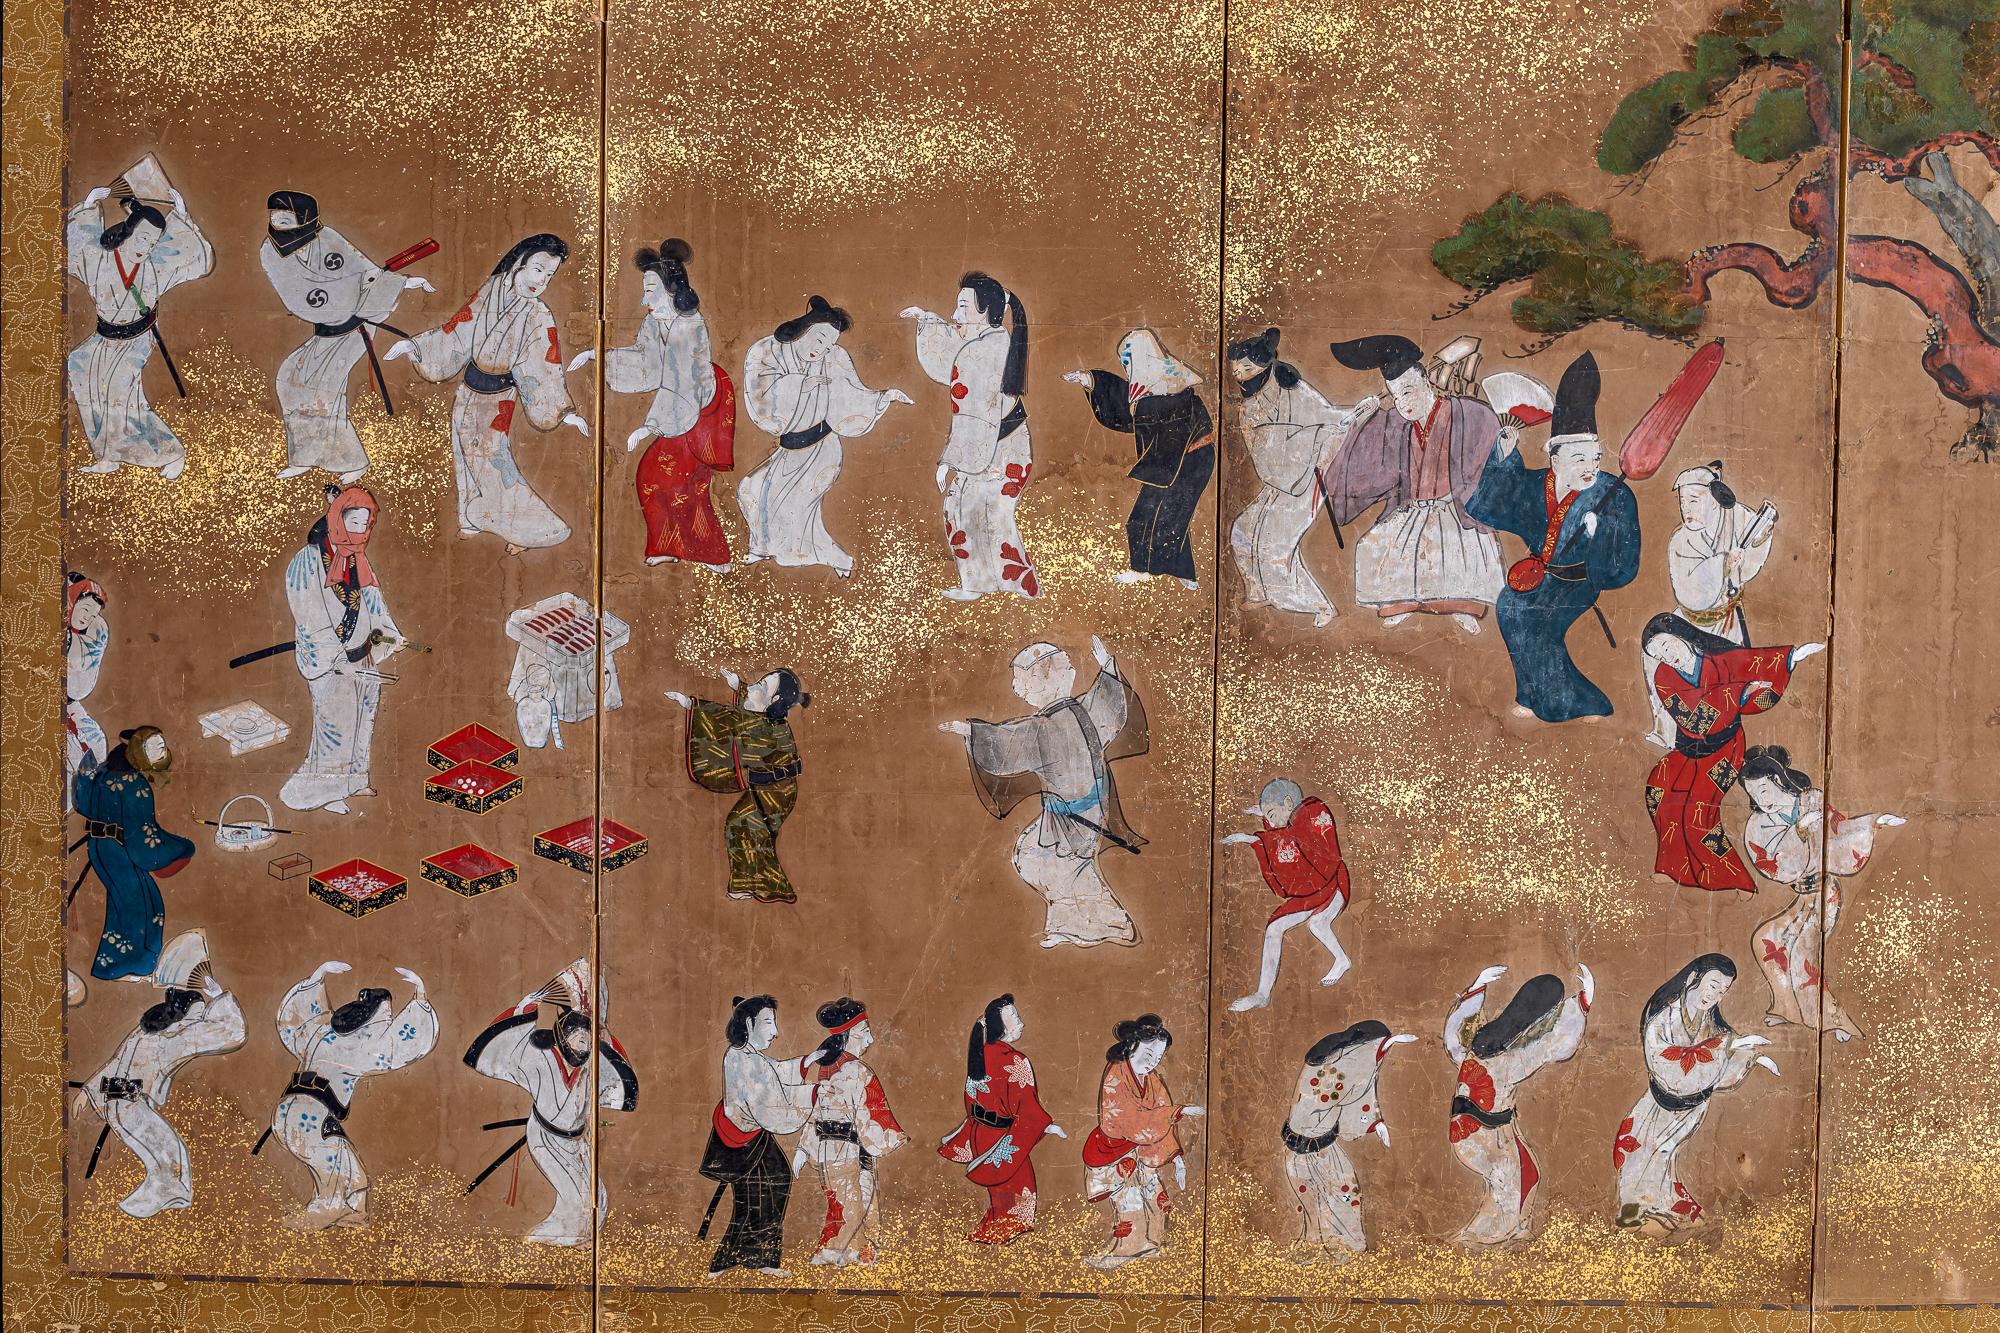 with thought to be Izumo no Okuni (1578-1613). Mineral pigments and gold dust on mulberry paper with silk brocade border.